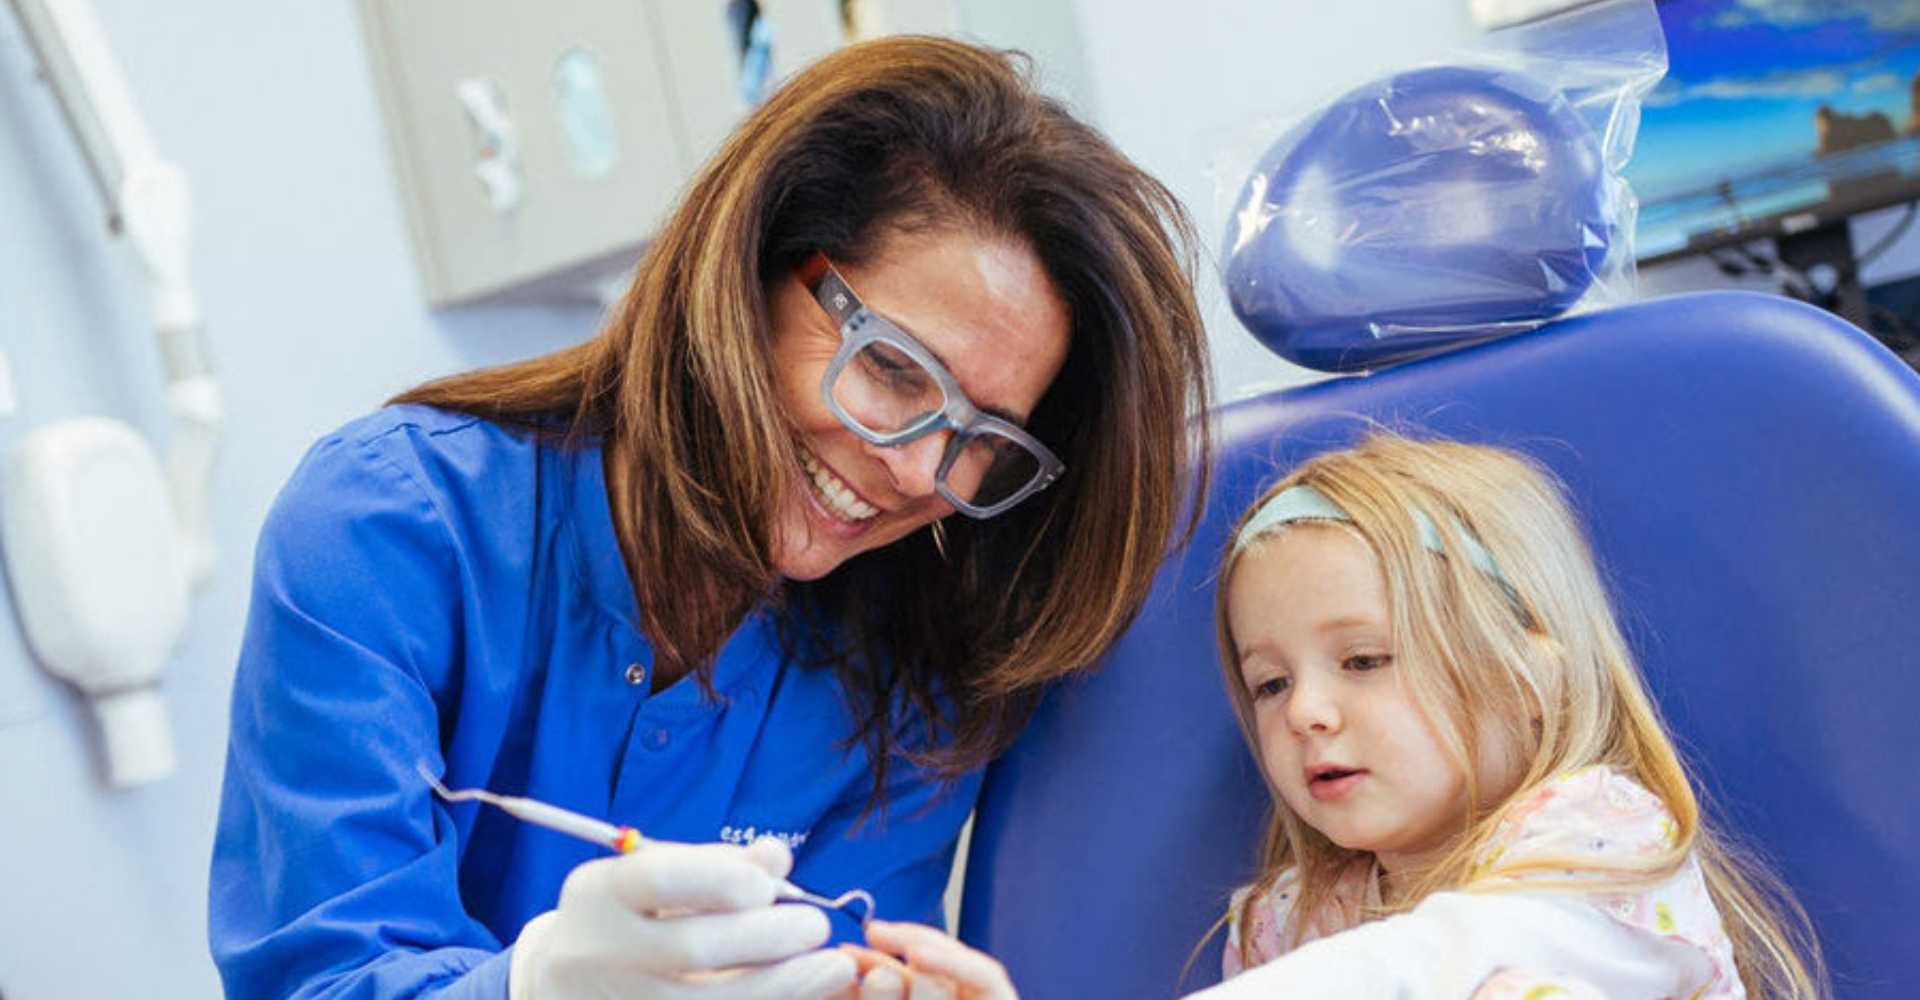 Curious kid looking at dental appliances